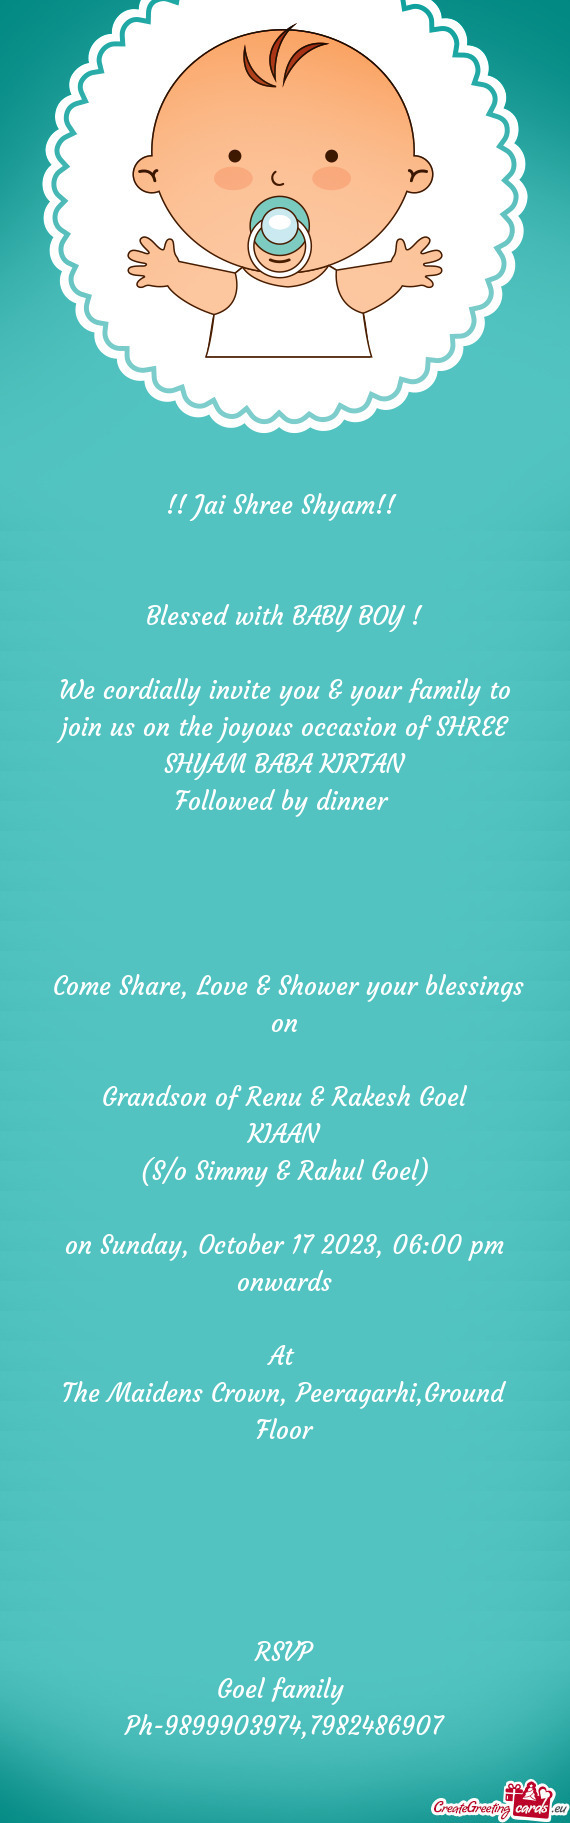 We cordially invite you & your family to join us on the joyous occasion of SHREE SHYAM BABA KIRTAN